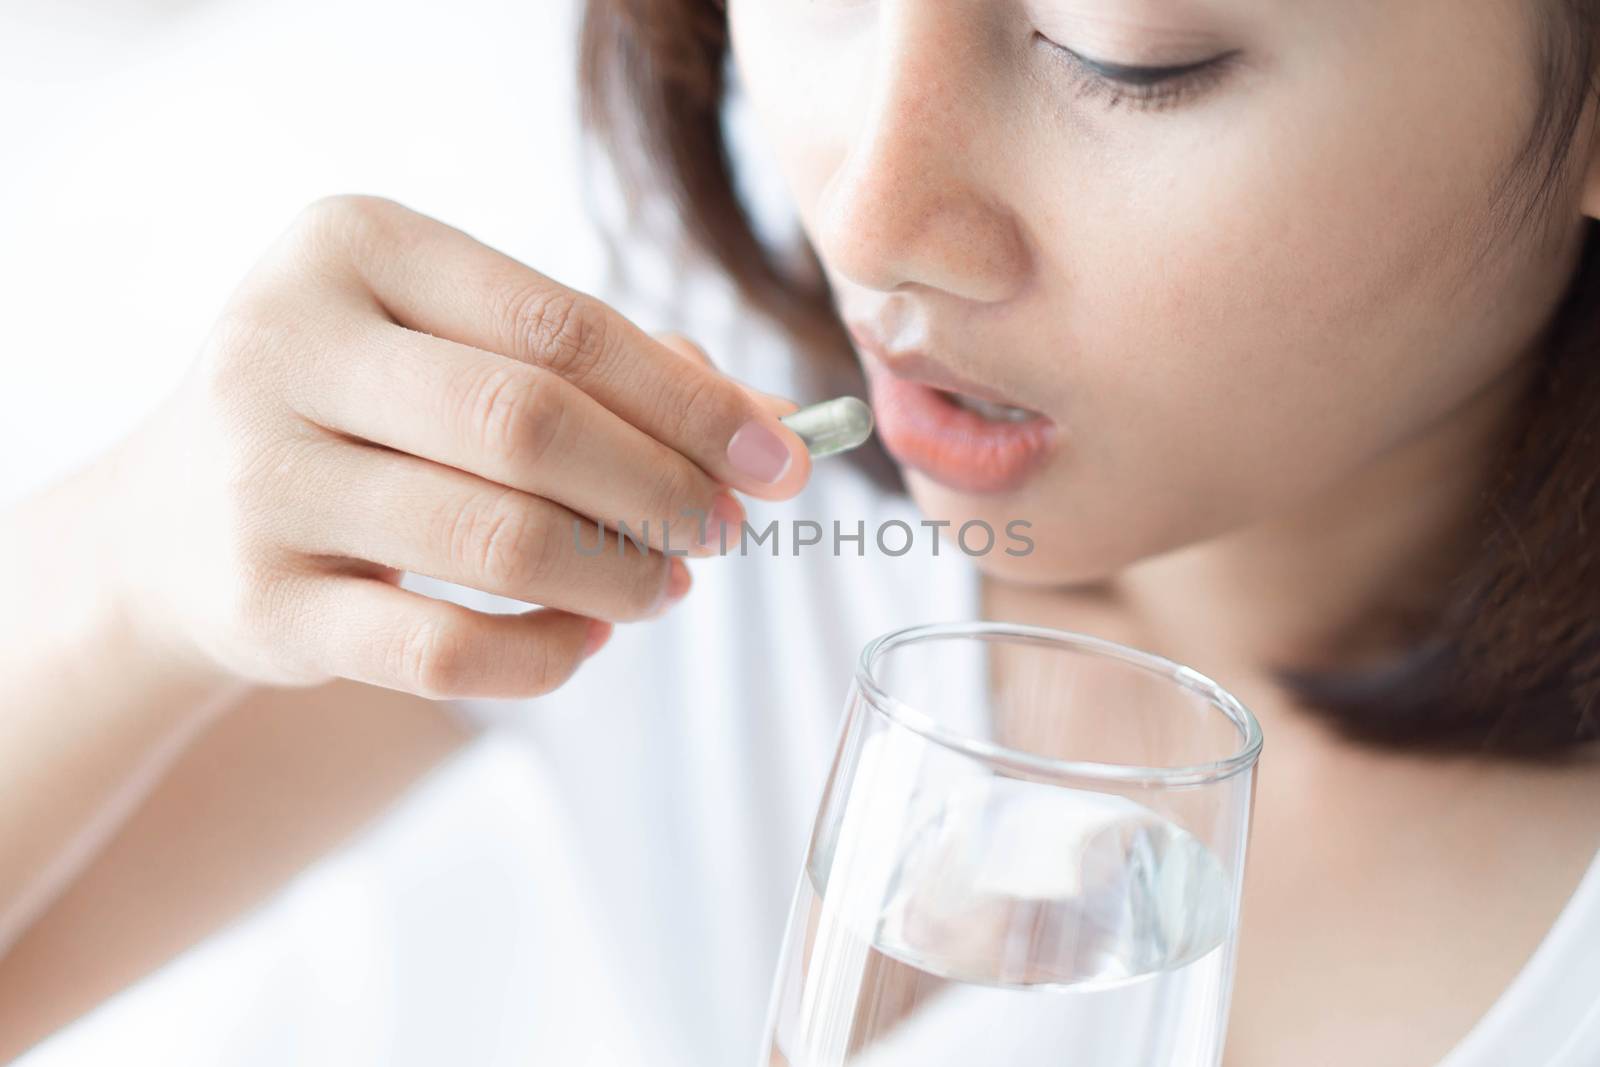 Closeup woman hand holding pills and glass of water, health care and medical concept, selective focus